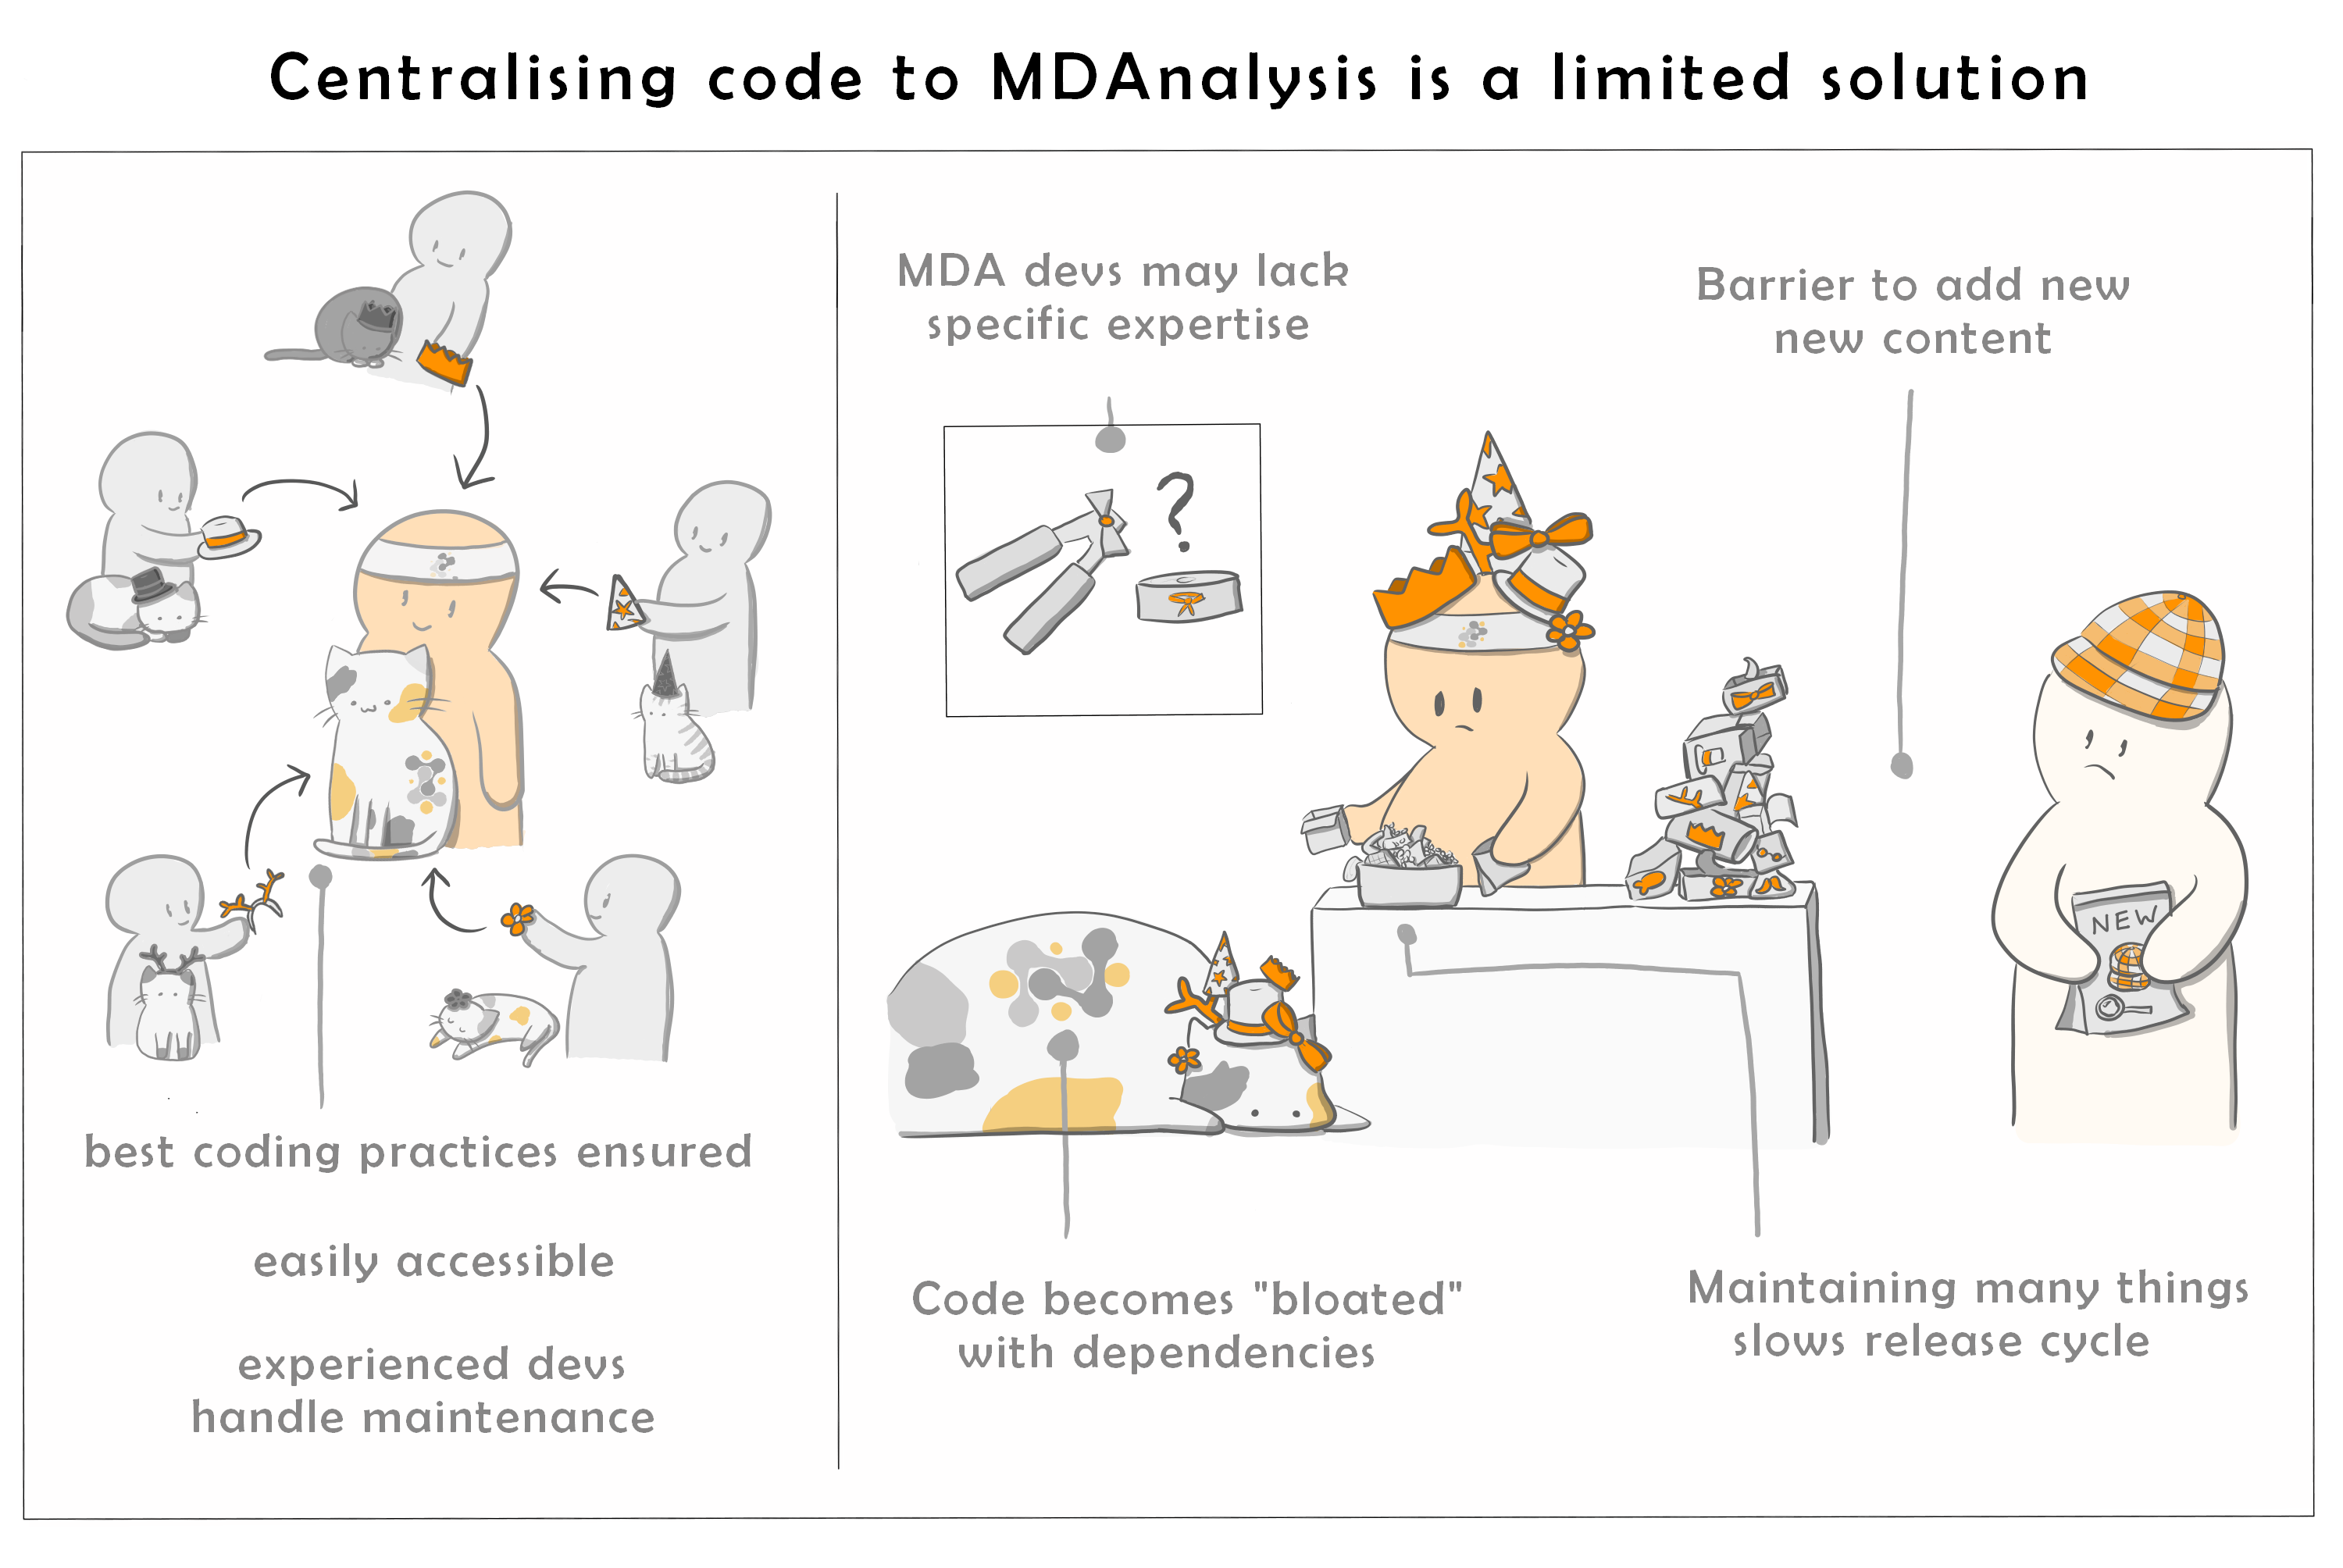 Centralising code to MDAnalysis is a limited solution